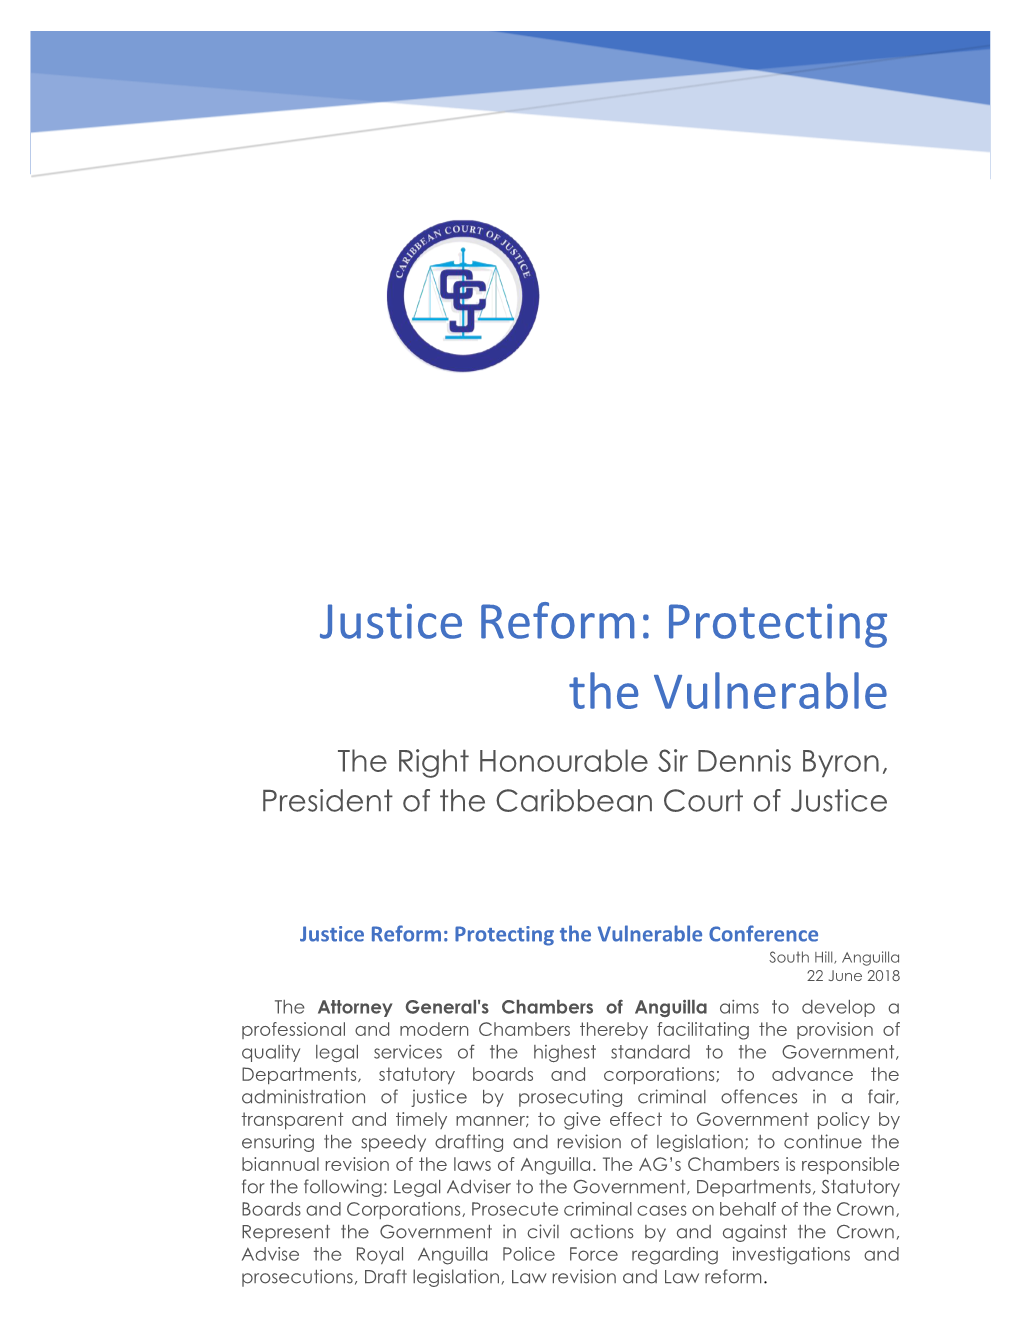 Opening Remarks at Justice Reform